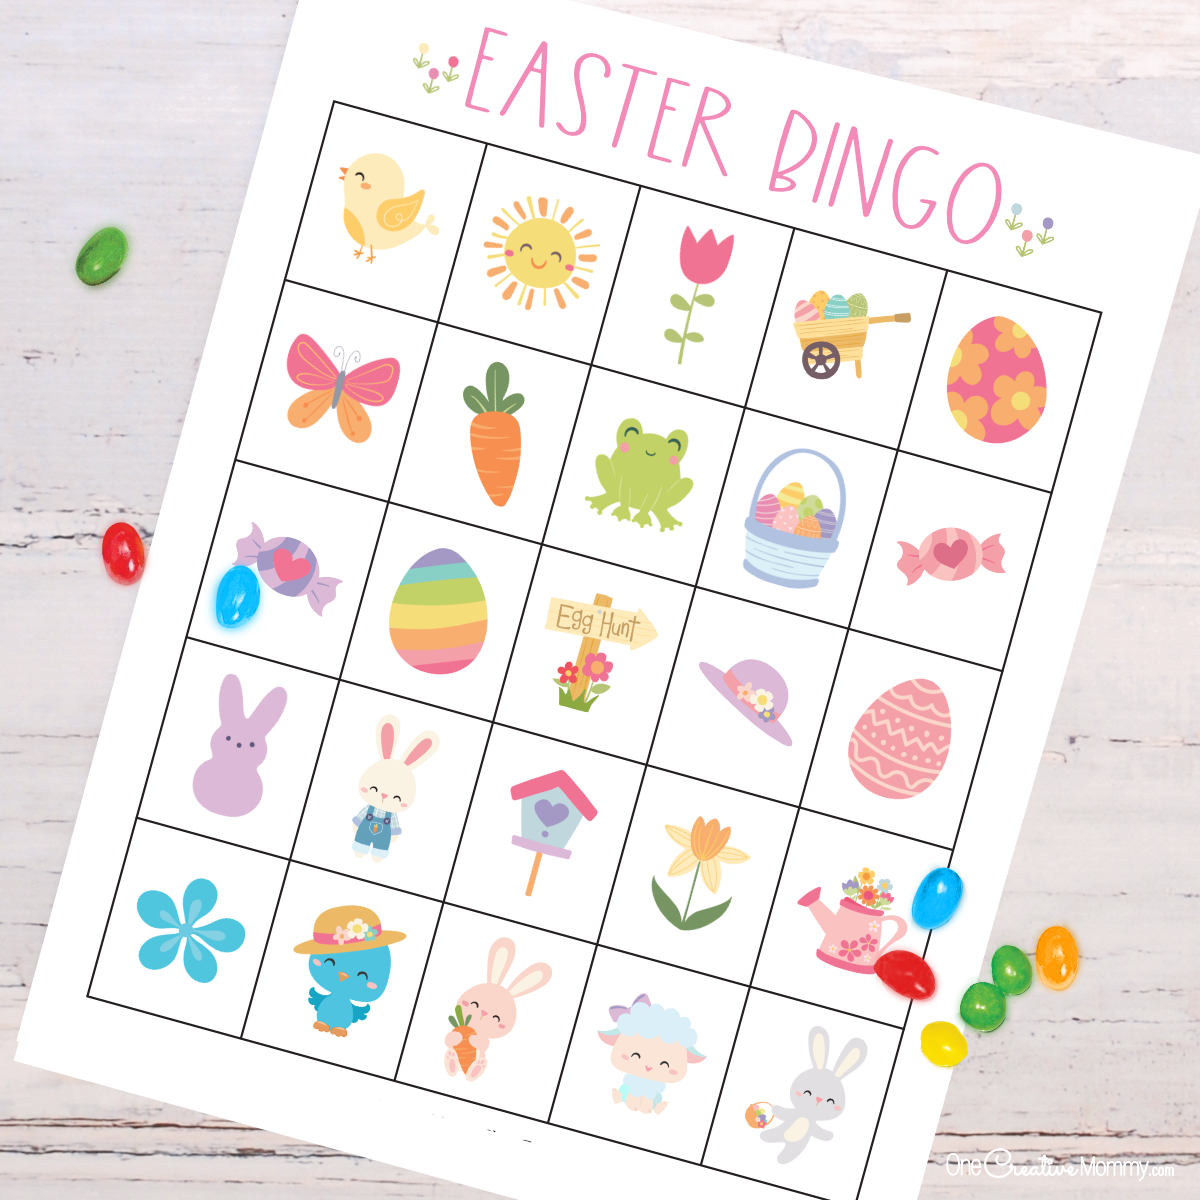 Zoomed-in view of an Easter bingo card laying on top of a white wooden table. Jellybeans are scattered across the game board. Pictures include Easter bunnies, Easter eggs, flowers, frogs, candy, baby animals, Easter baskets, butterflies, a birdhouse, and more.